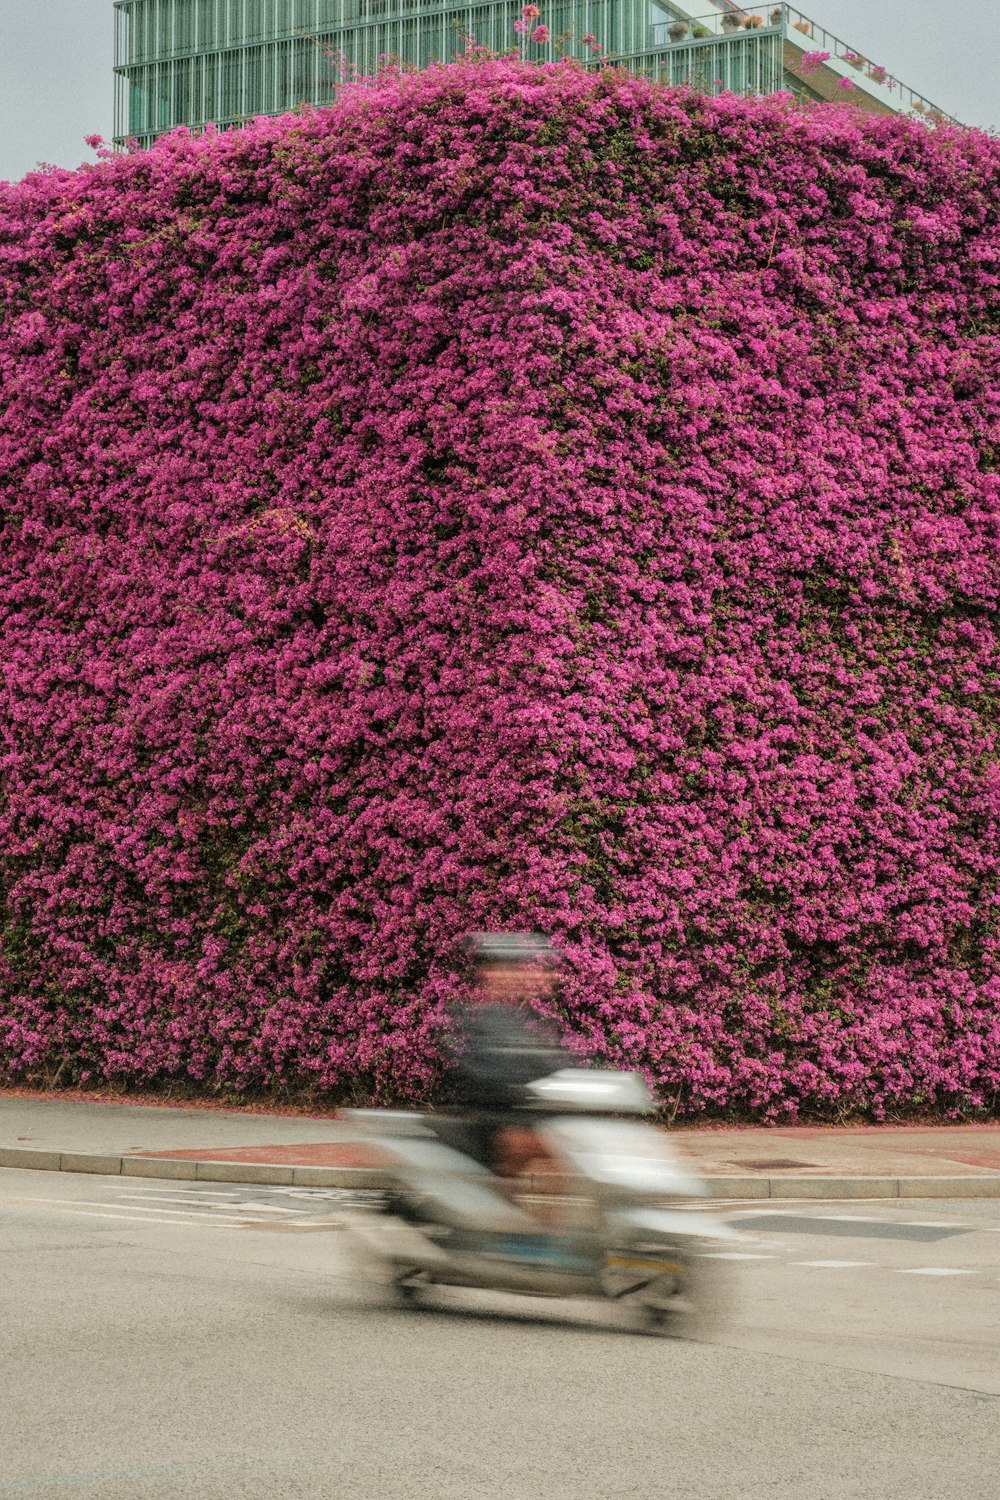 a motor scooter driving past a large purple plant